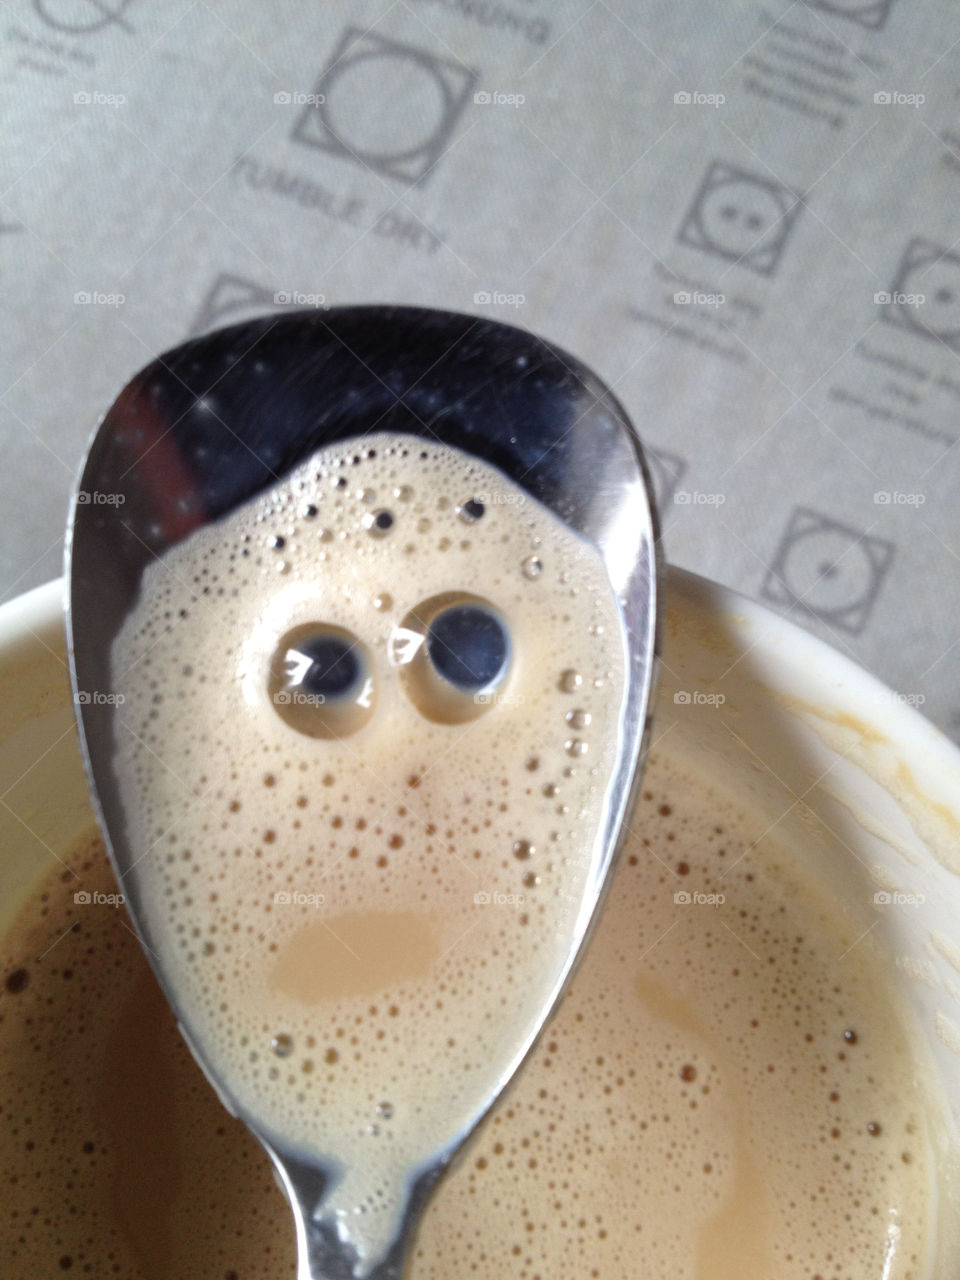 spoon sad cappuccino by surface59